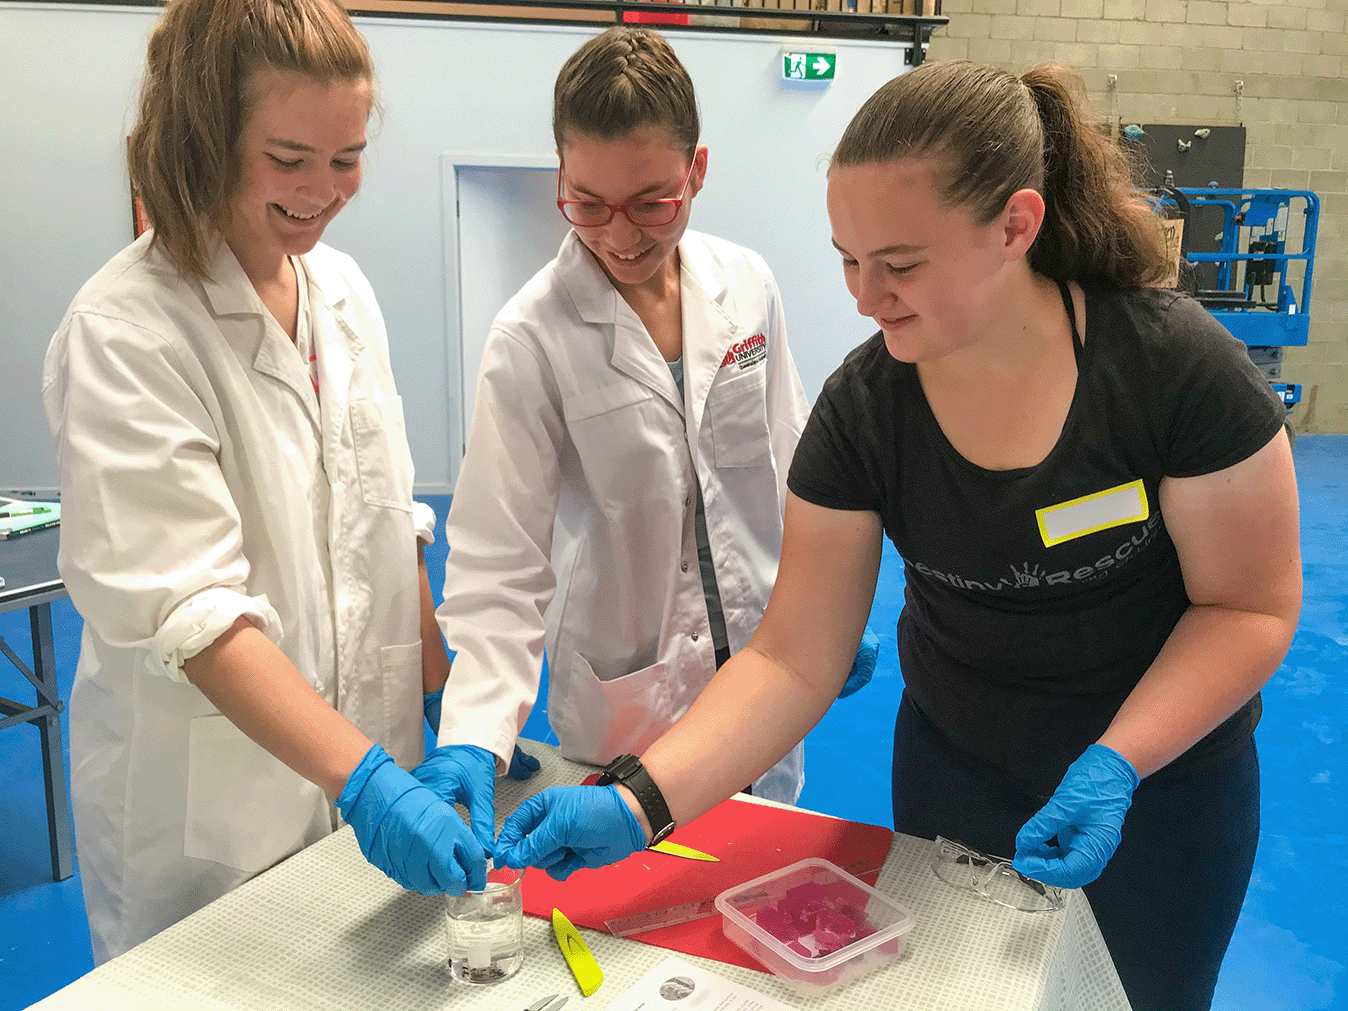 Senior Year 12 biology students experimenting at a Faith Christian School distance education workshop